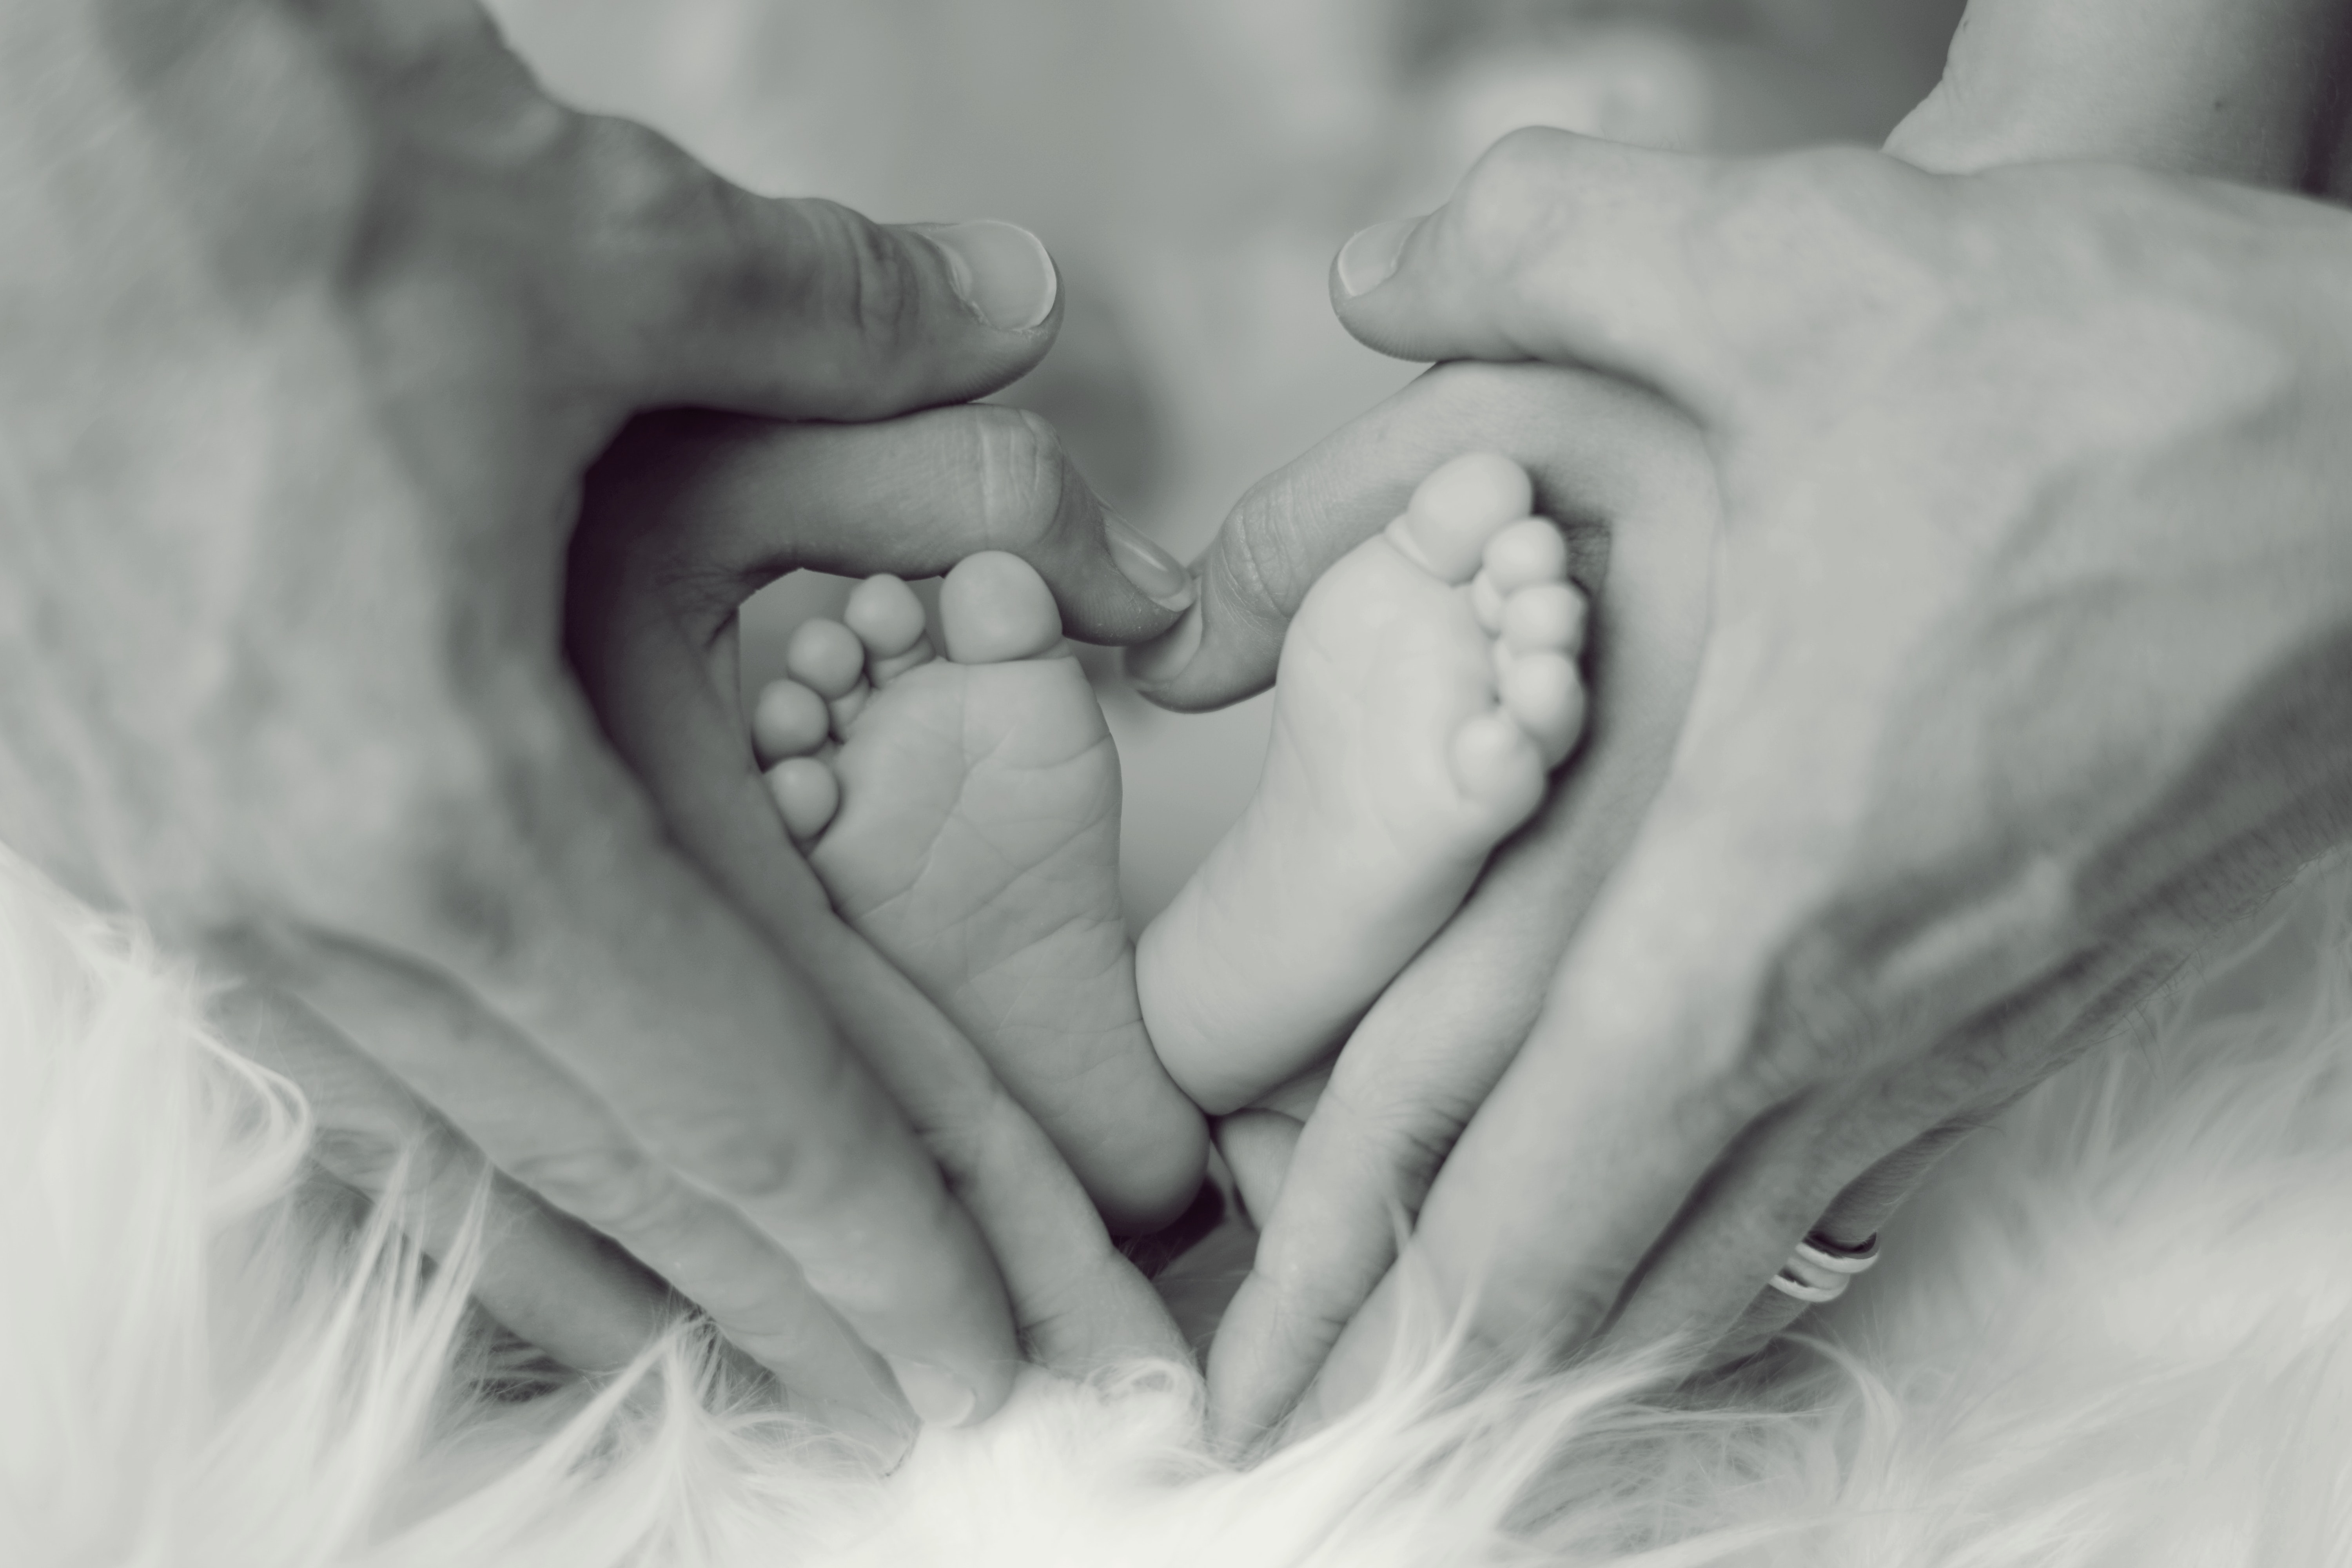 grayscale-photo-of-baby-feet-with-father-and-mother-hands-in-733881.jpg